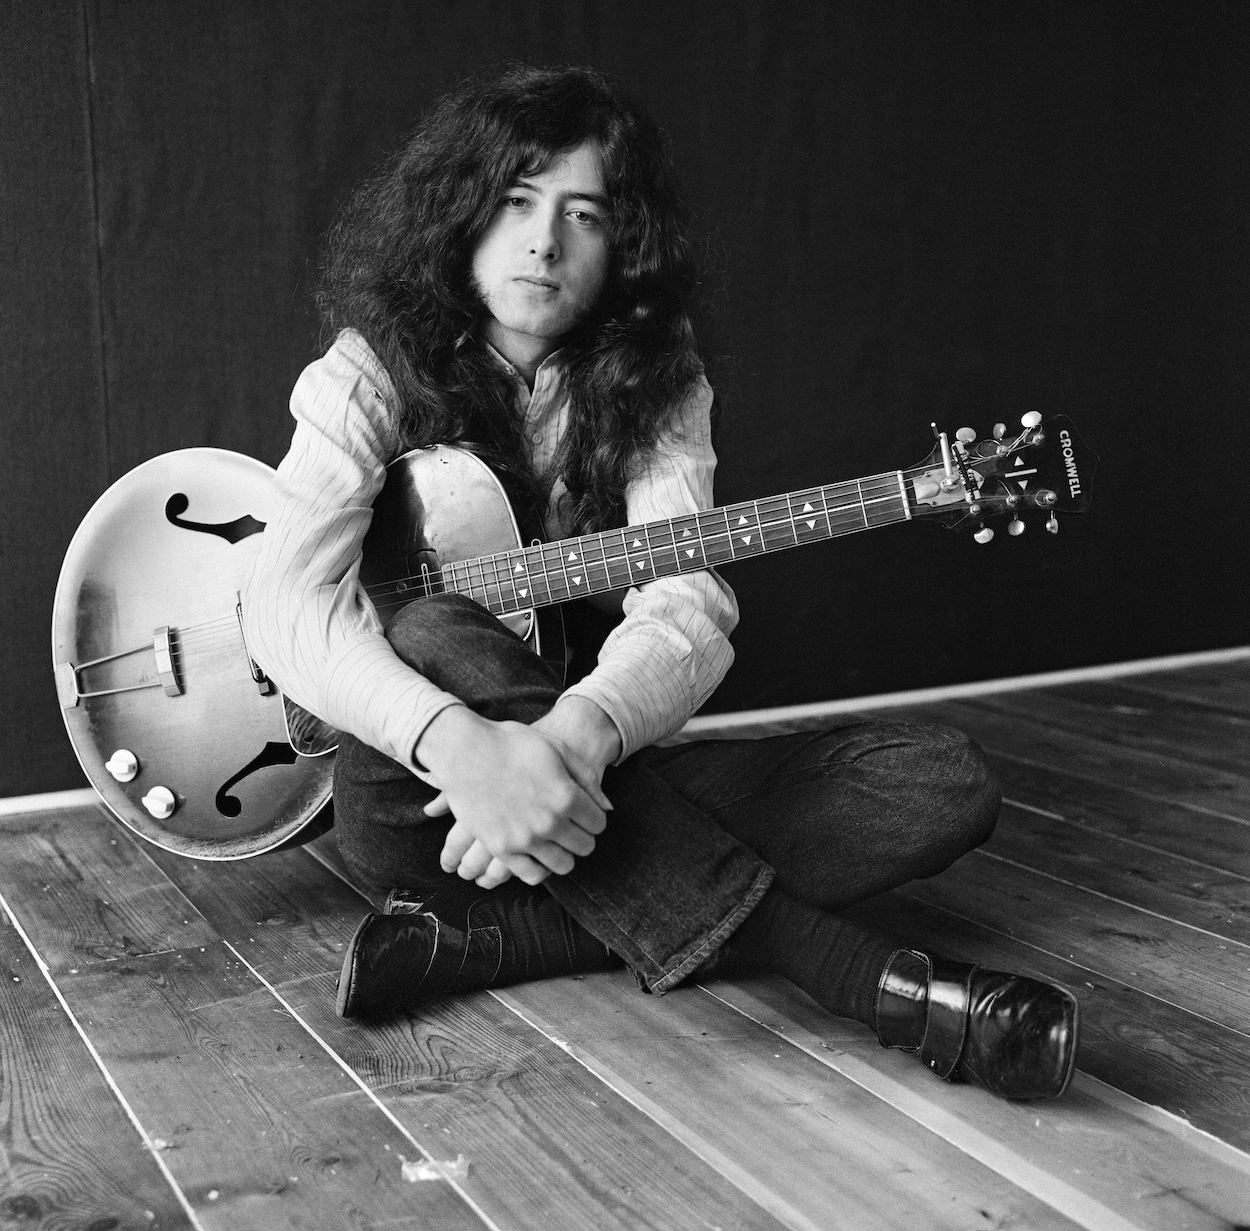 Led Zeppelin guitarist Jimmy Page, who made a great point when he explained why he thinks all guitar playing is astounding.